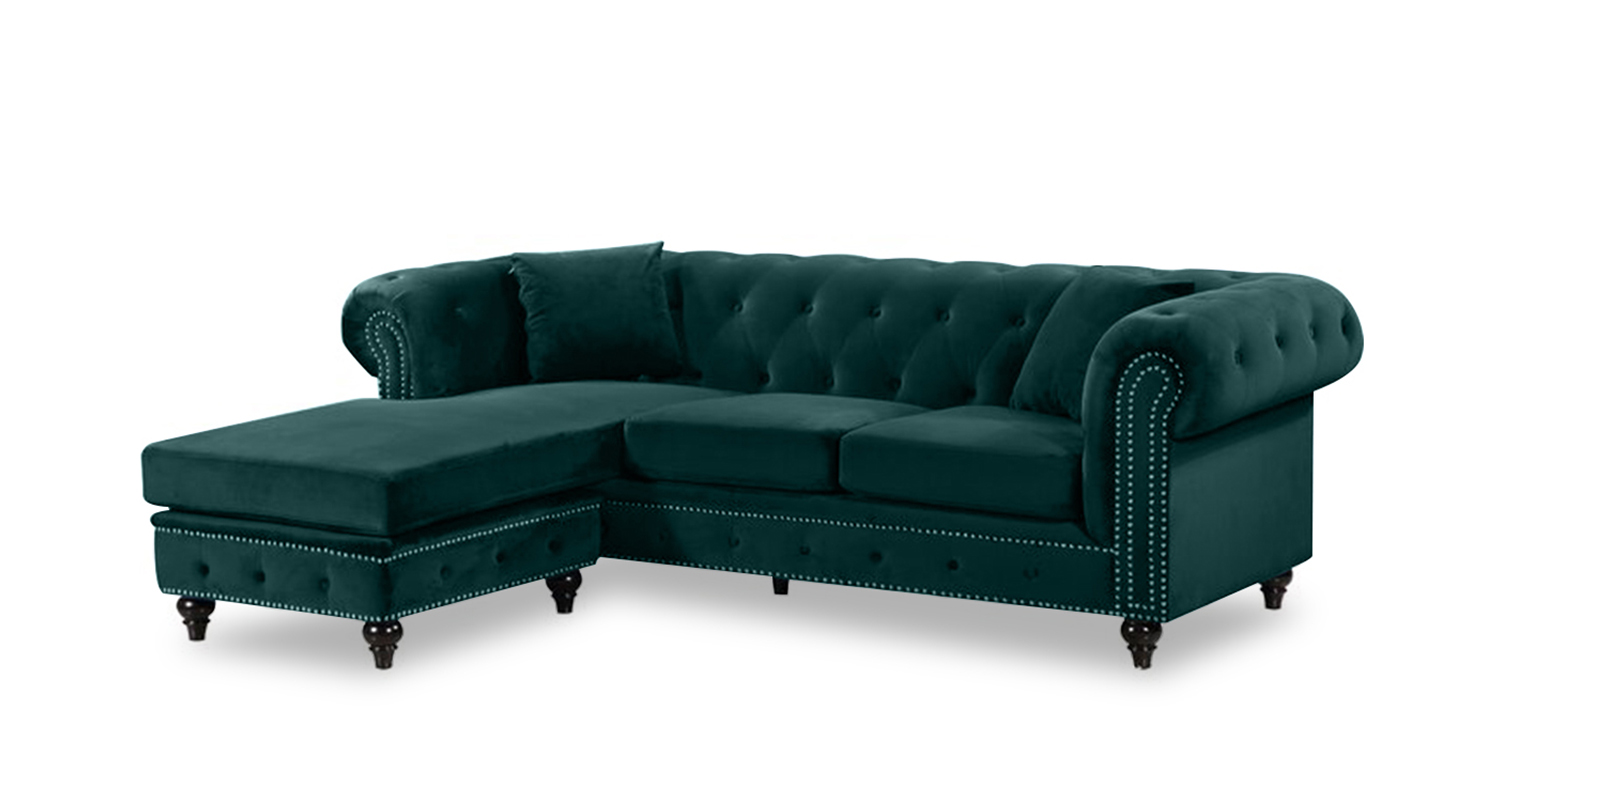 Courageous Fabric Rhs Sectional Sofa In Green Colour Dreamzz Furniture Online